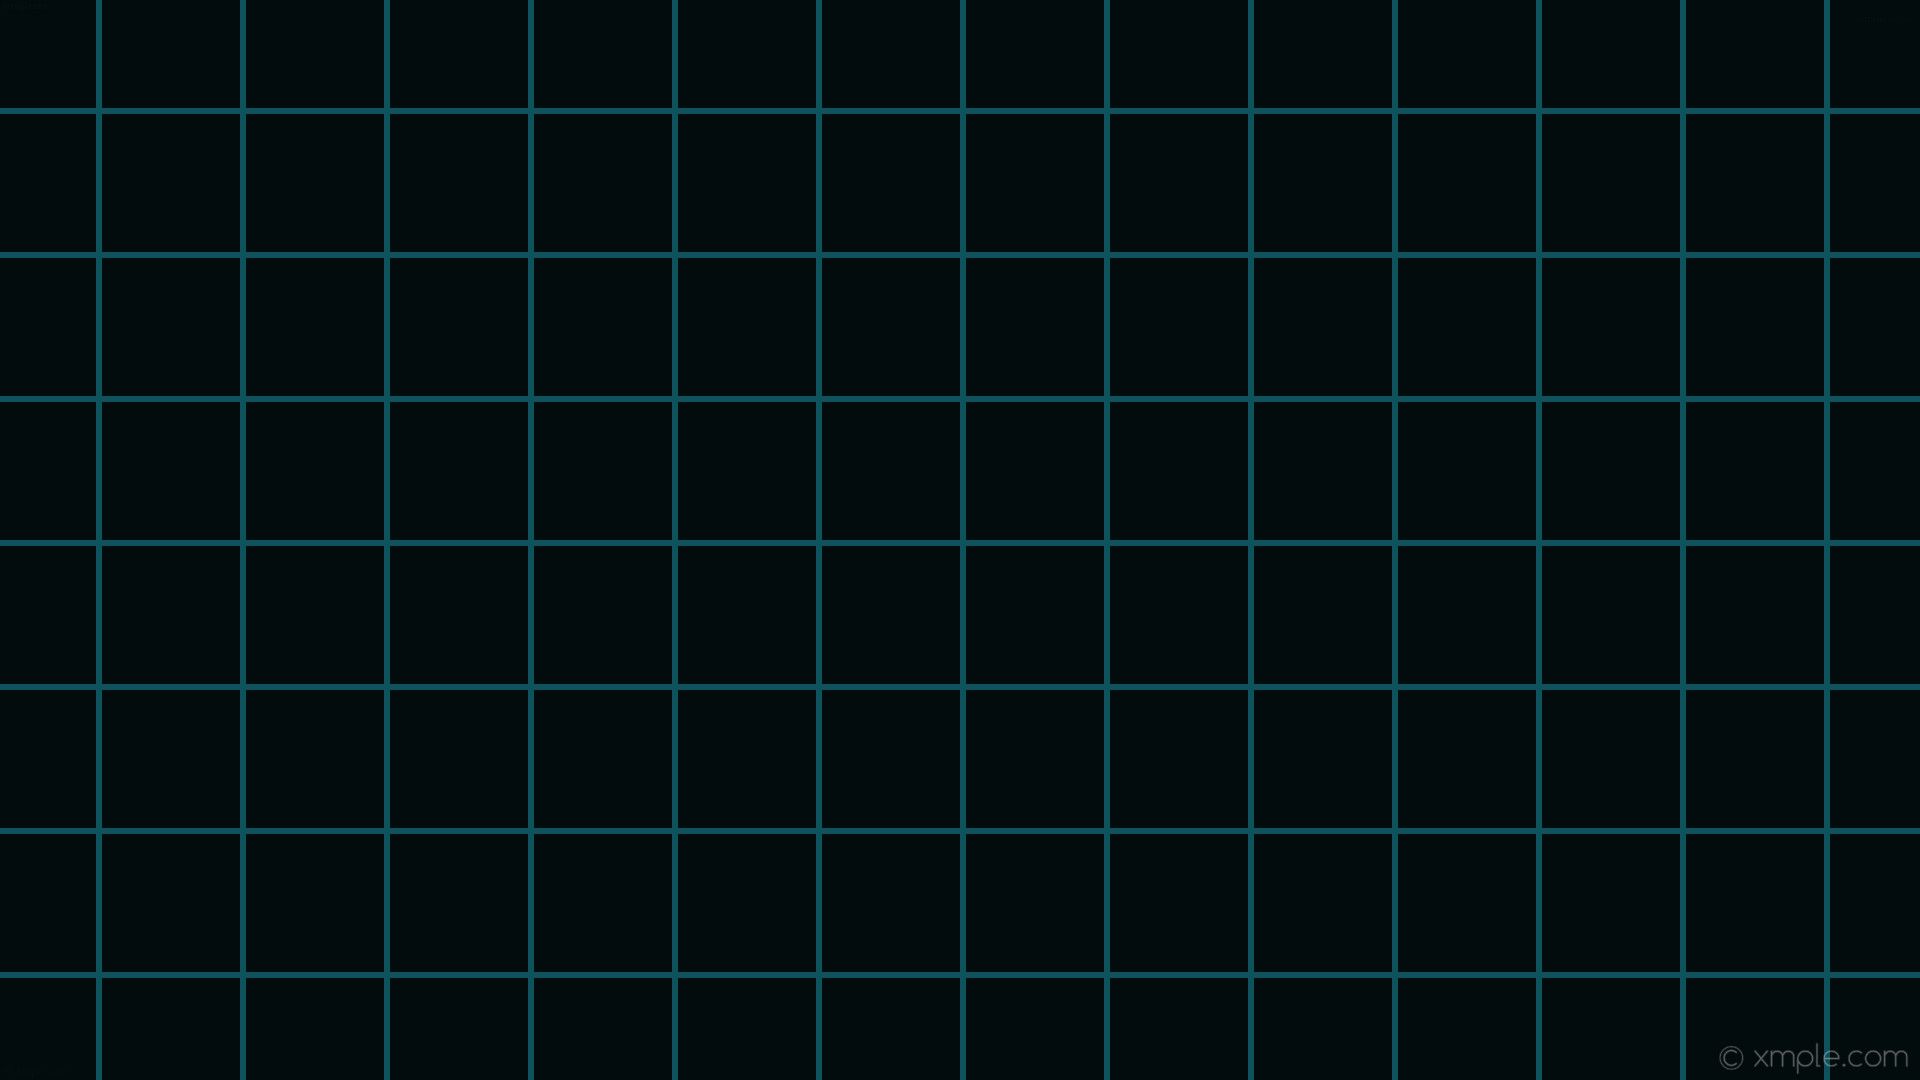 A black and blue grid on the screen - Grid